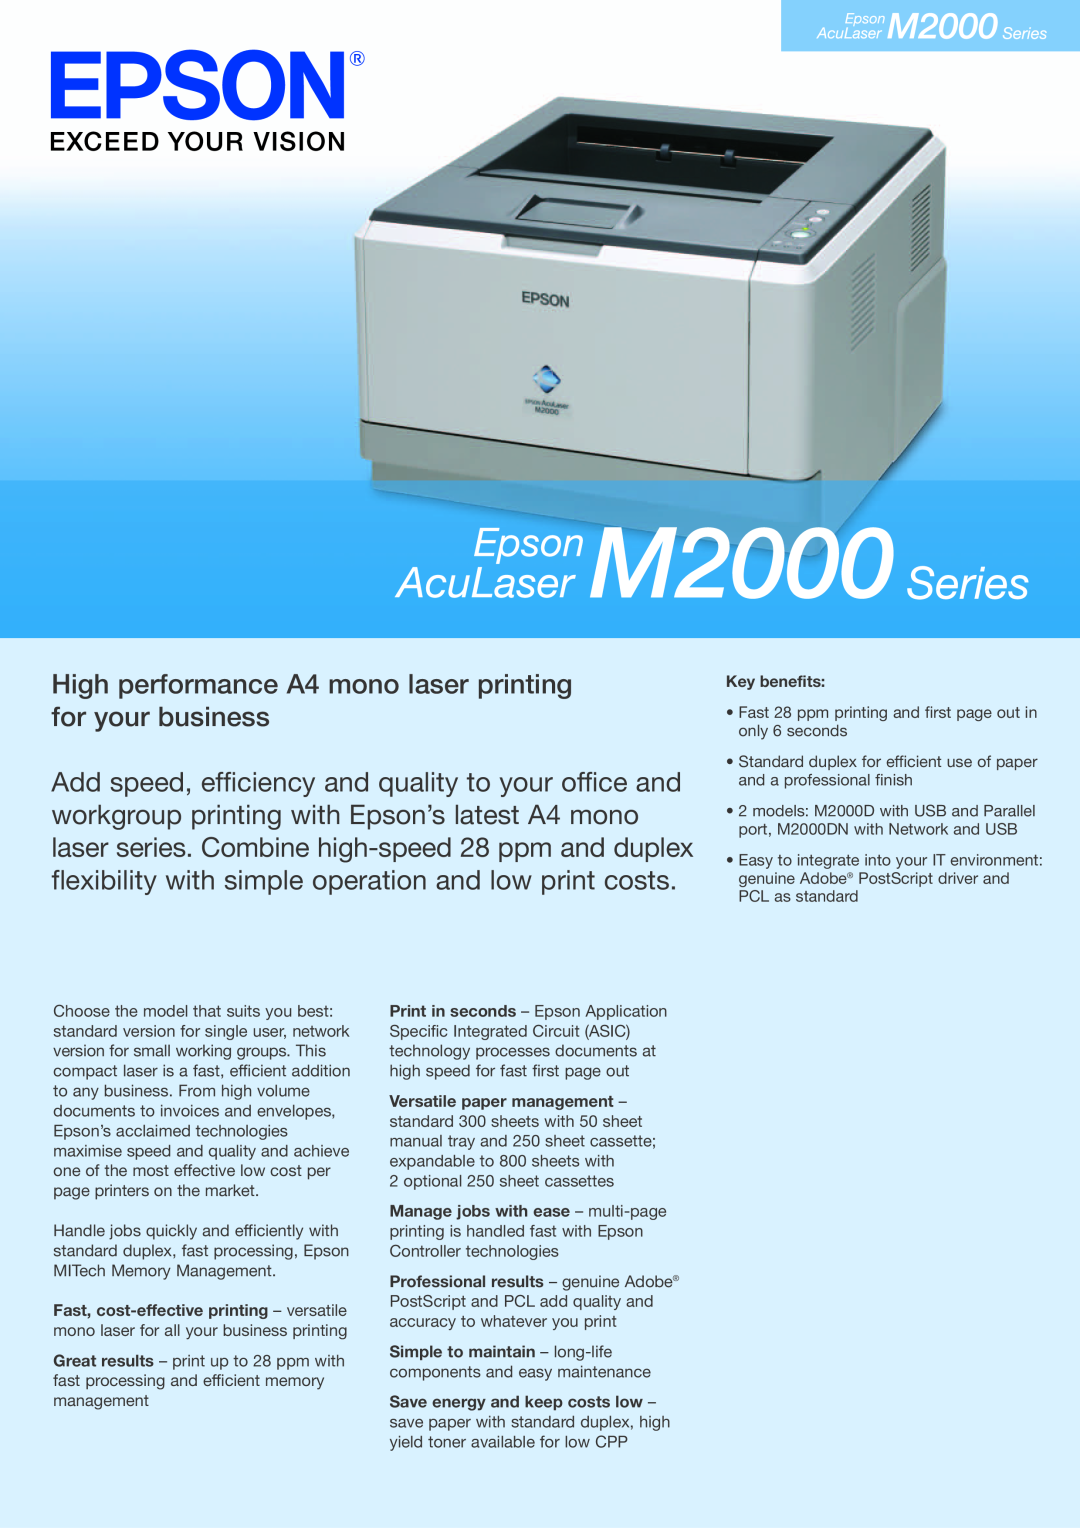 Epson M2000 manual High performance A4 mono laser printing for your business, Key benefits, Save energy and keep costs low 